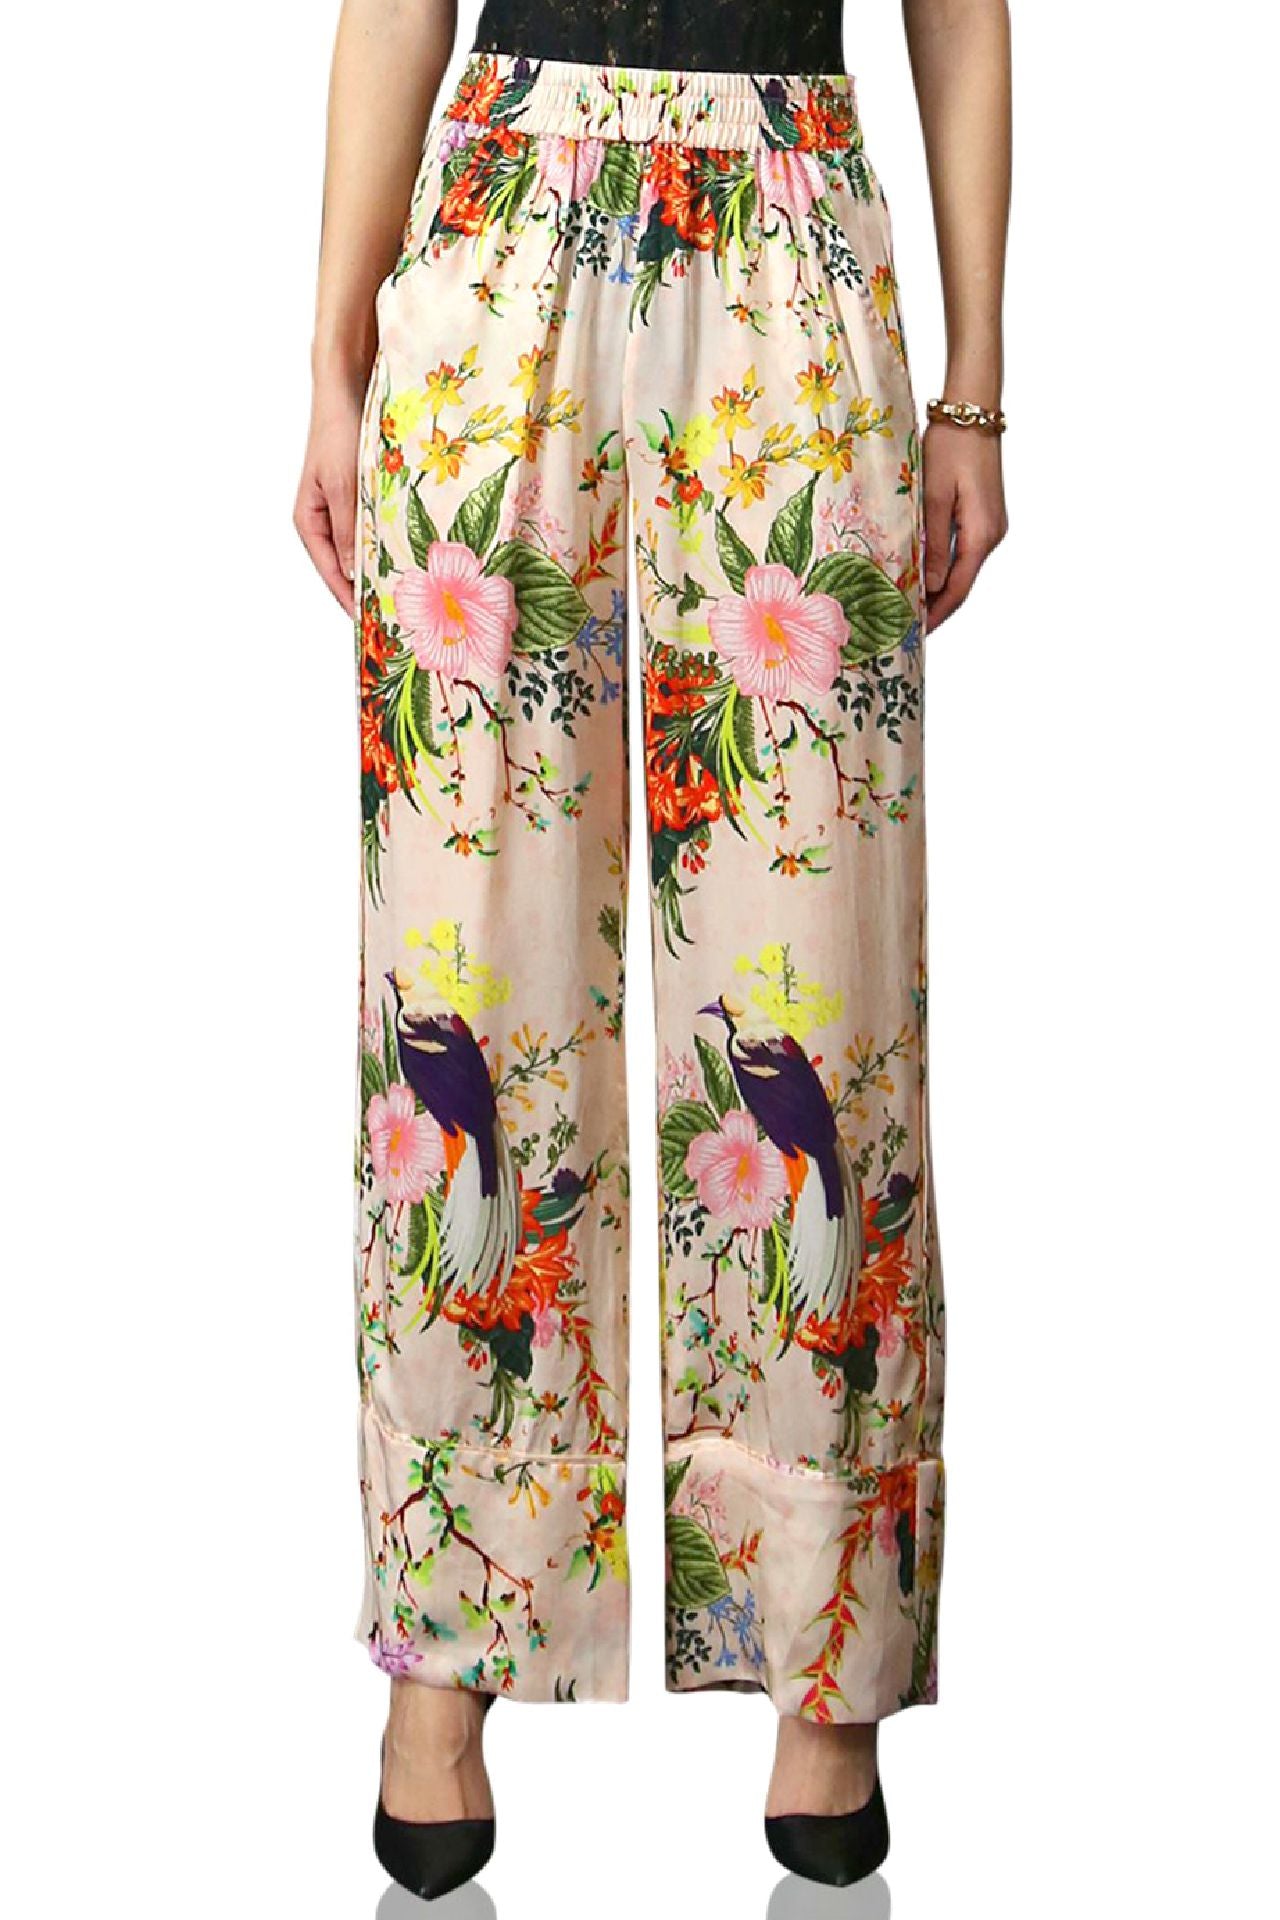 Retro Floral Print Long Silk Pants For Women Vintage Style With Strethy  Waist Tangada Pantalon 3H568 210609 From Dou02, $15.75